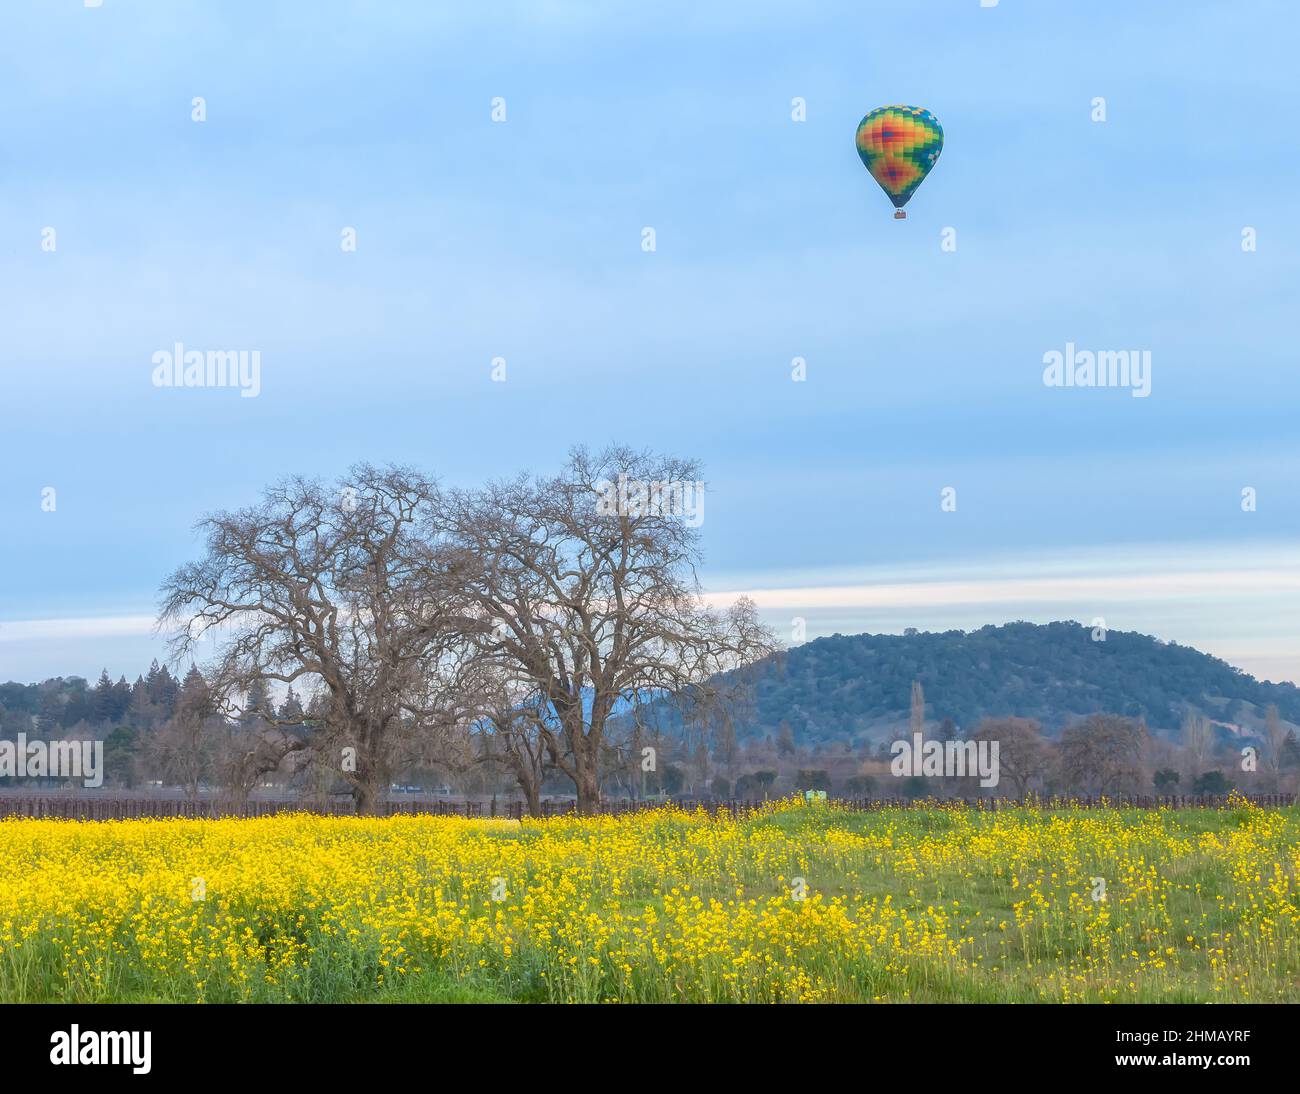 A hot air balloon fly over the Napa Valley, with field of blooming field mustard flowers in early morning, California, USA. Stock Photo